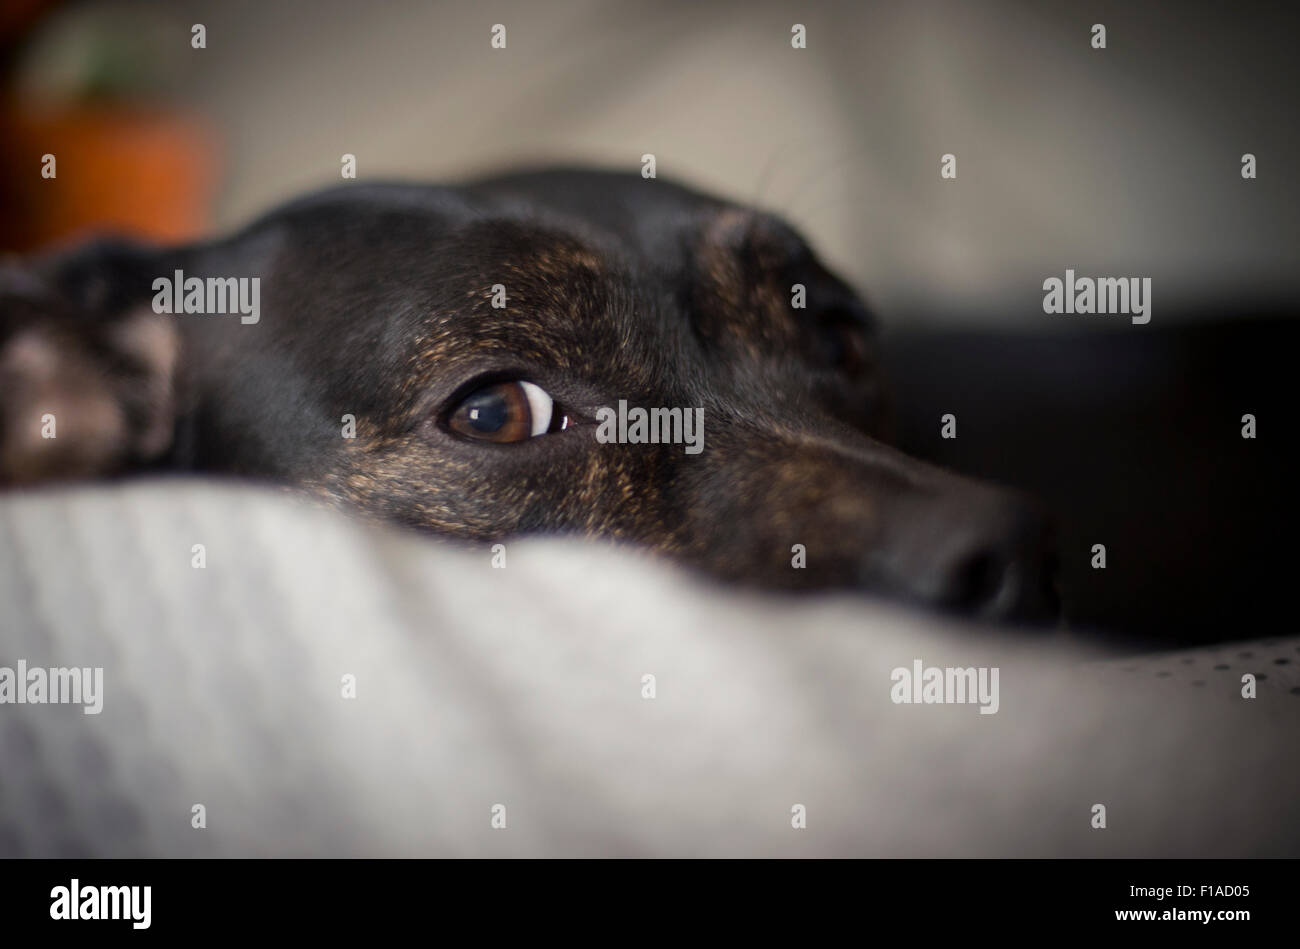 Dog Laying Down With One Eye Open Stock Photo